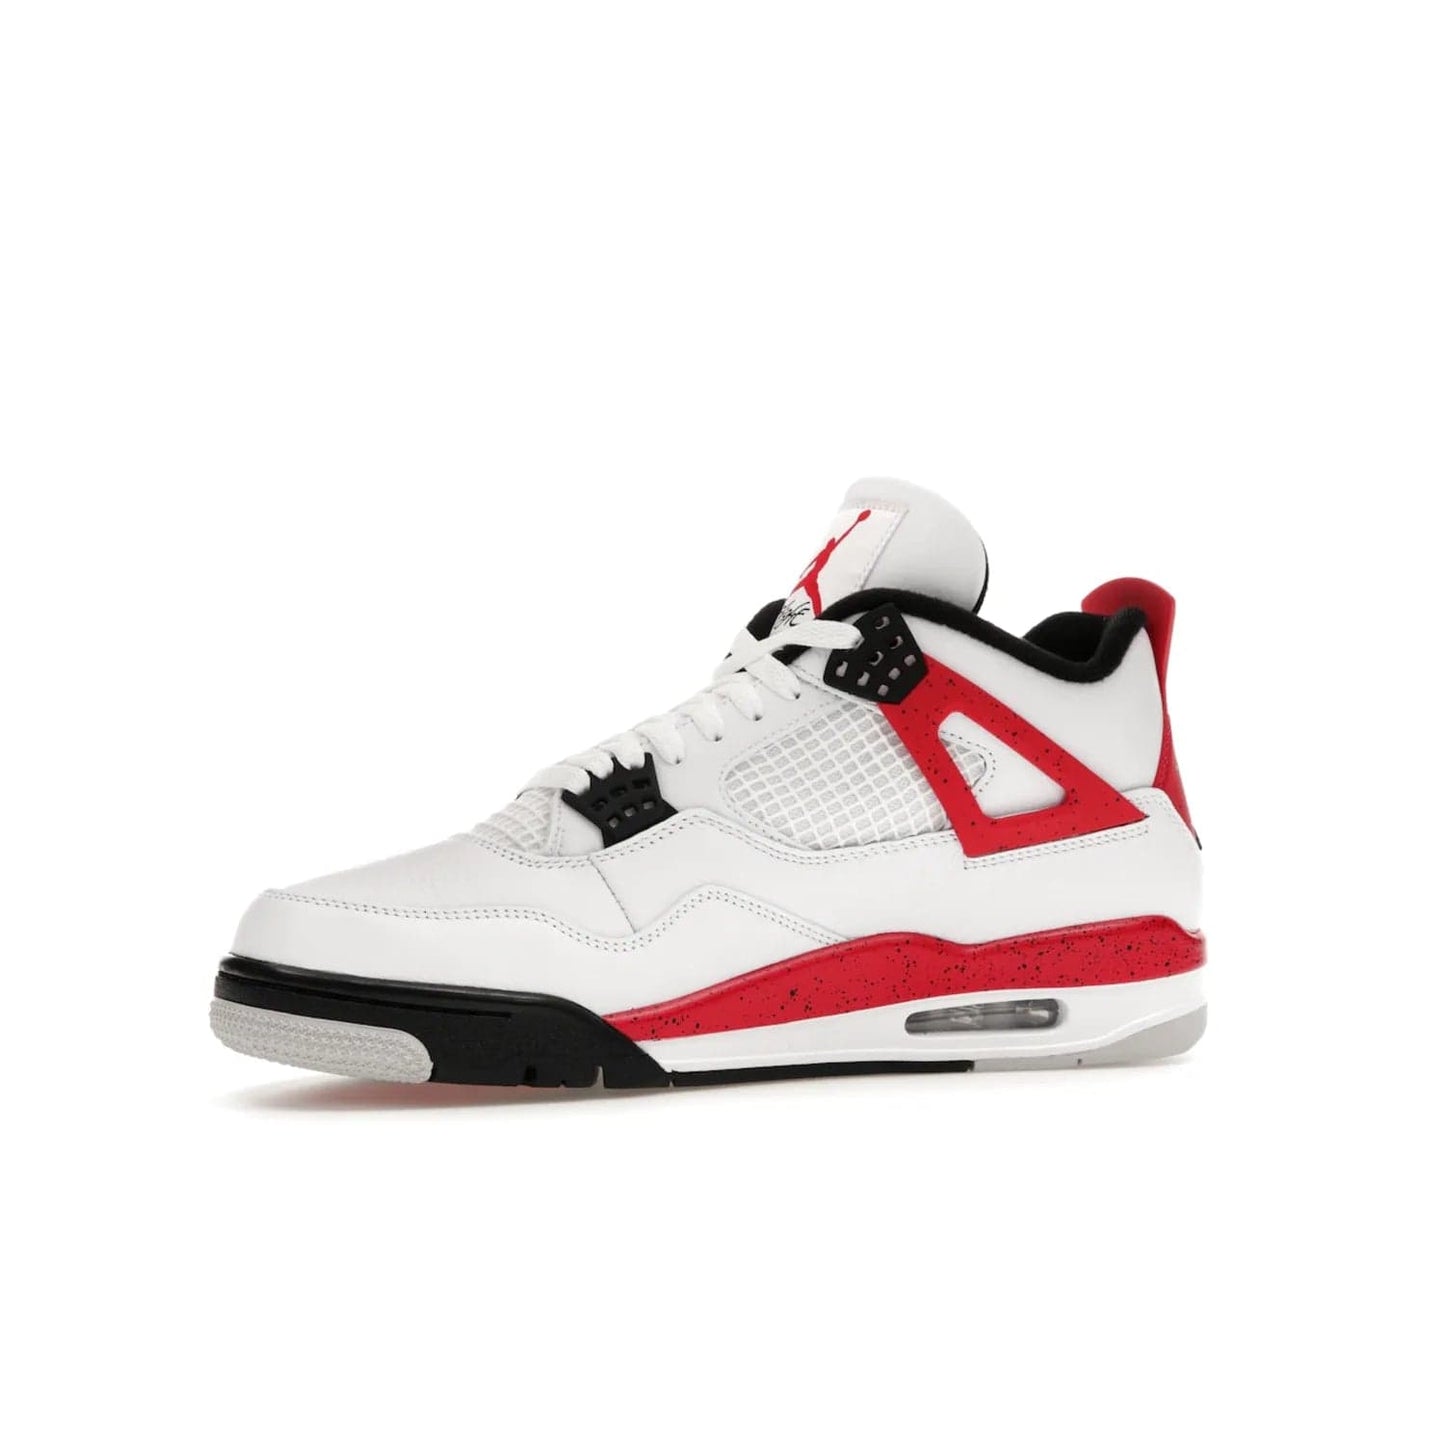 Jordan 4 Retro Red Cement - Image 17 - Only at www.BallersClubKickz.com - Iconic Jordan silhouette with a unique twist. White premium leather uppers with fire red and black detailing. Black, white, and fire red midsole with mesh detailing and Jumpman logo. Jordan 4 Retro Red Cement released with premium price.